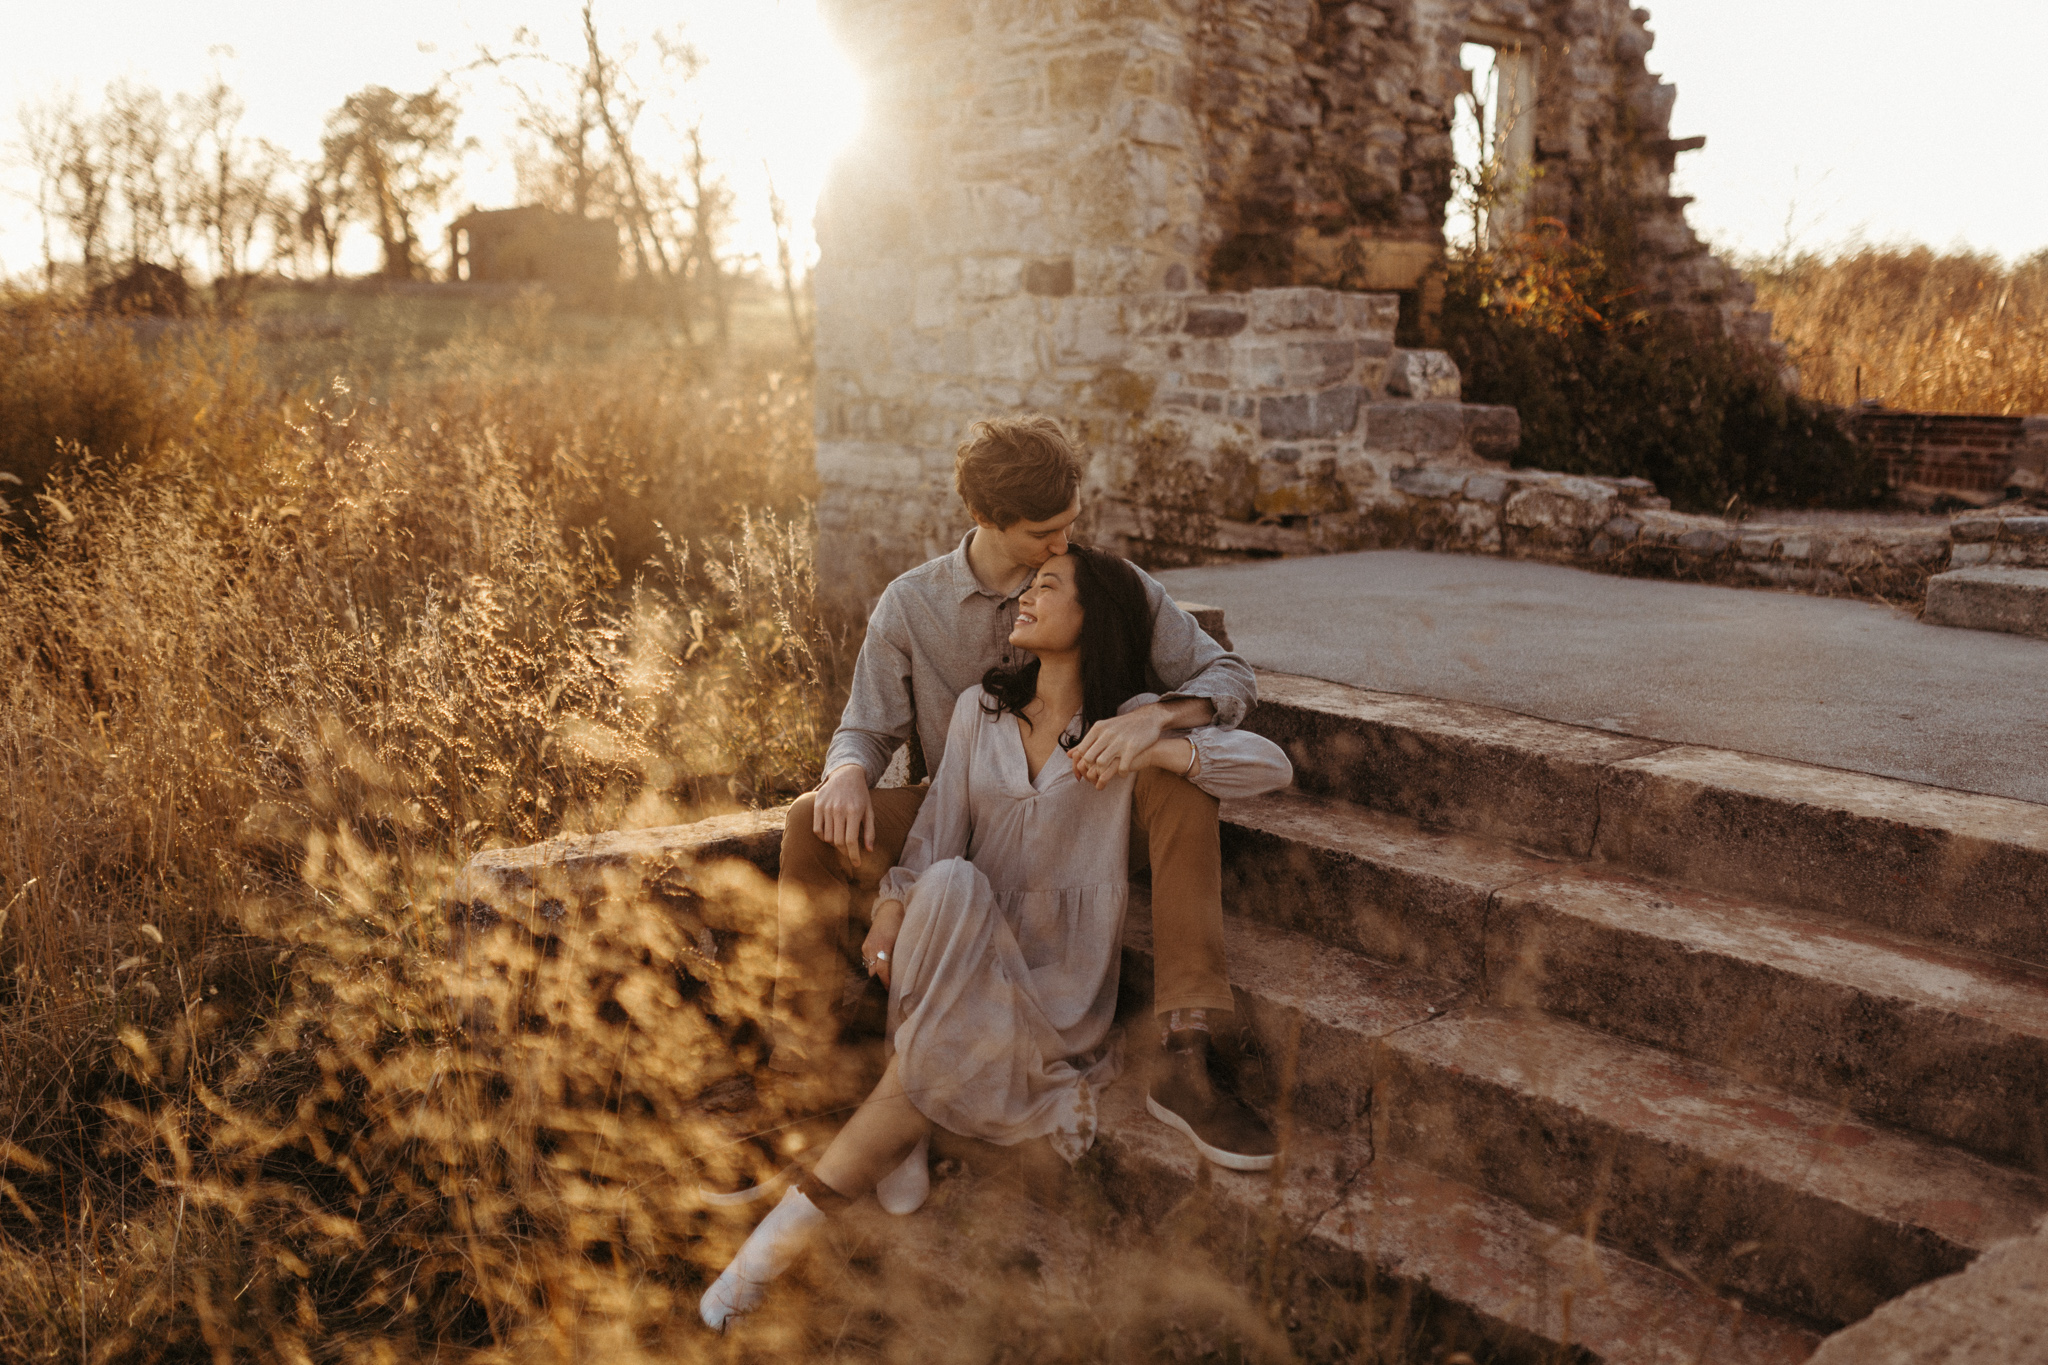 Stylish & Adventurous Engagement In The Fields of Harpers Ferry, West Virginia // Nature-Inspired Wedding Photographer Victoria Selman